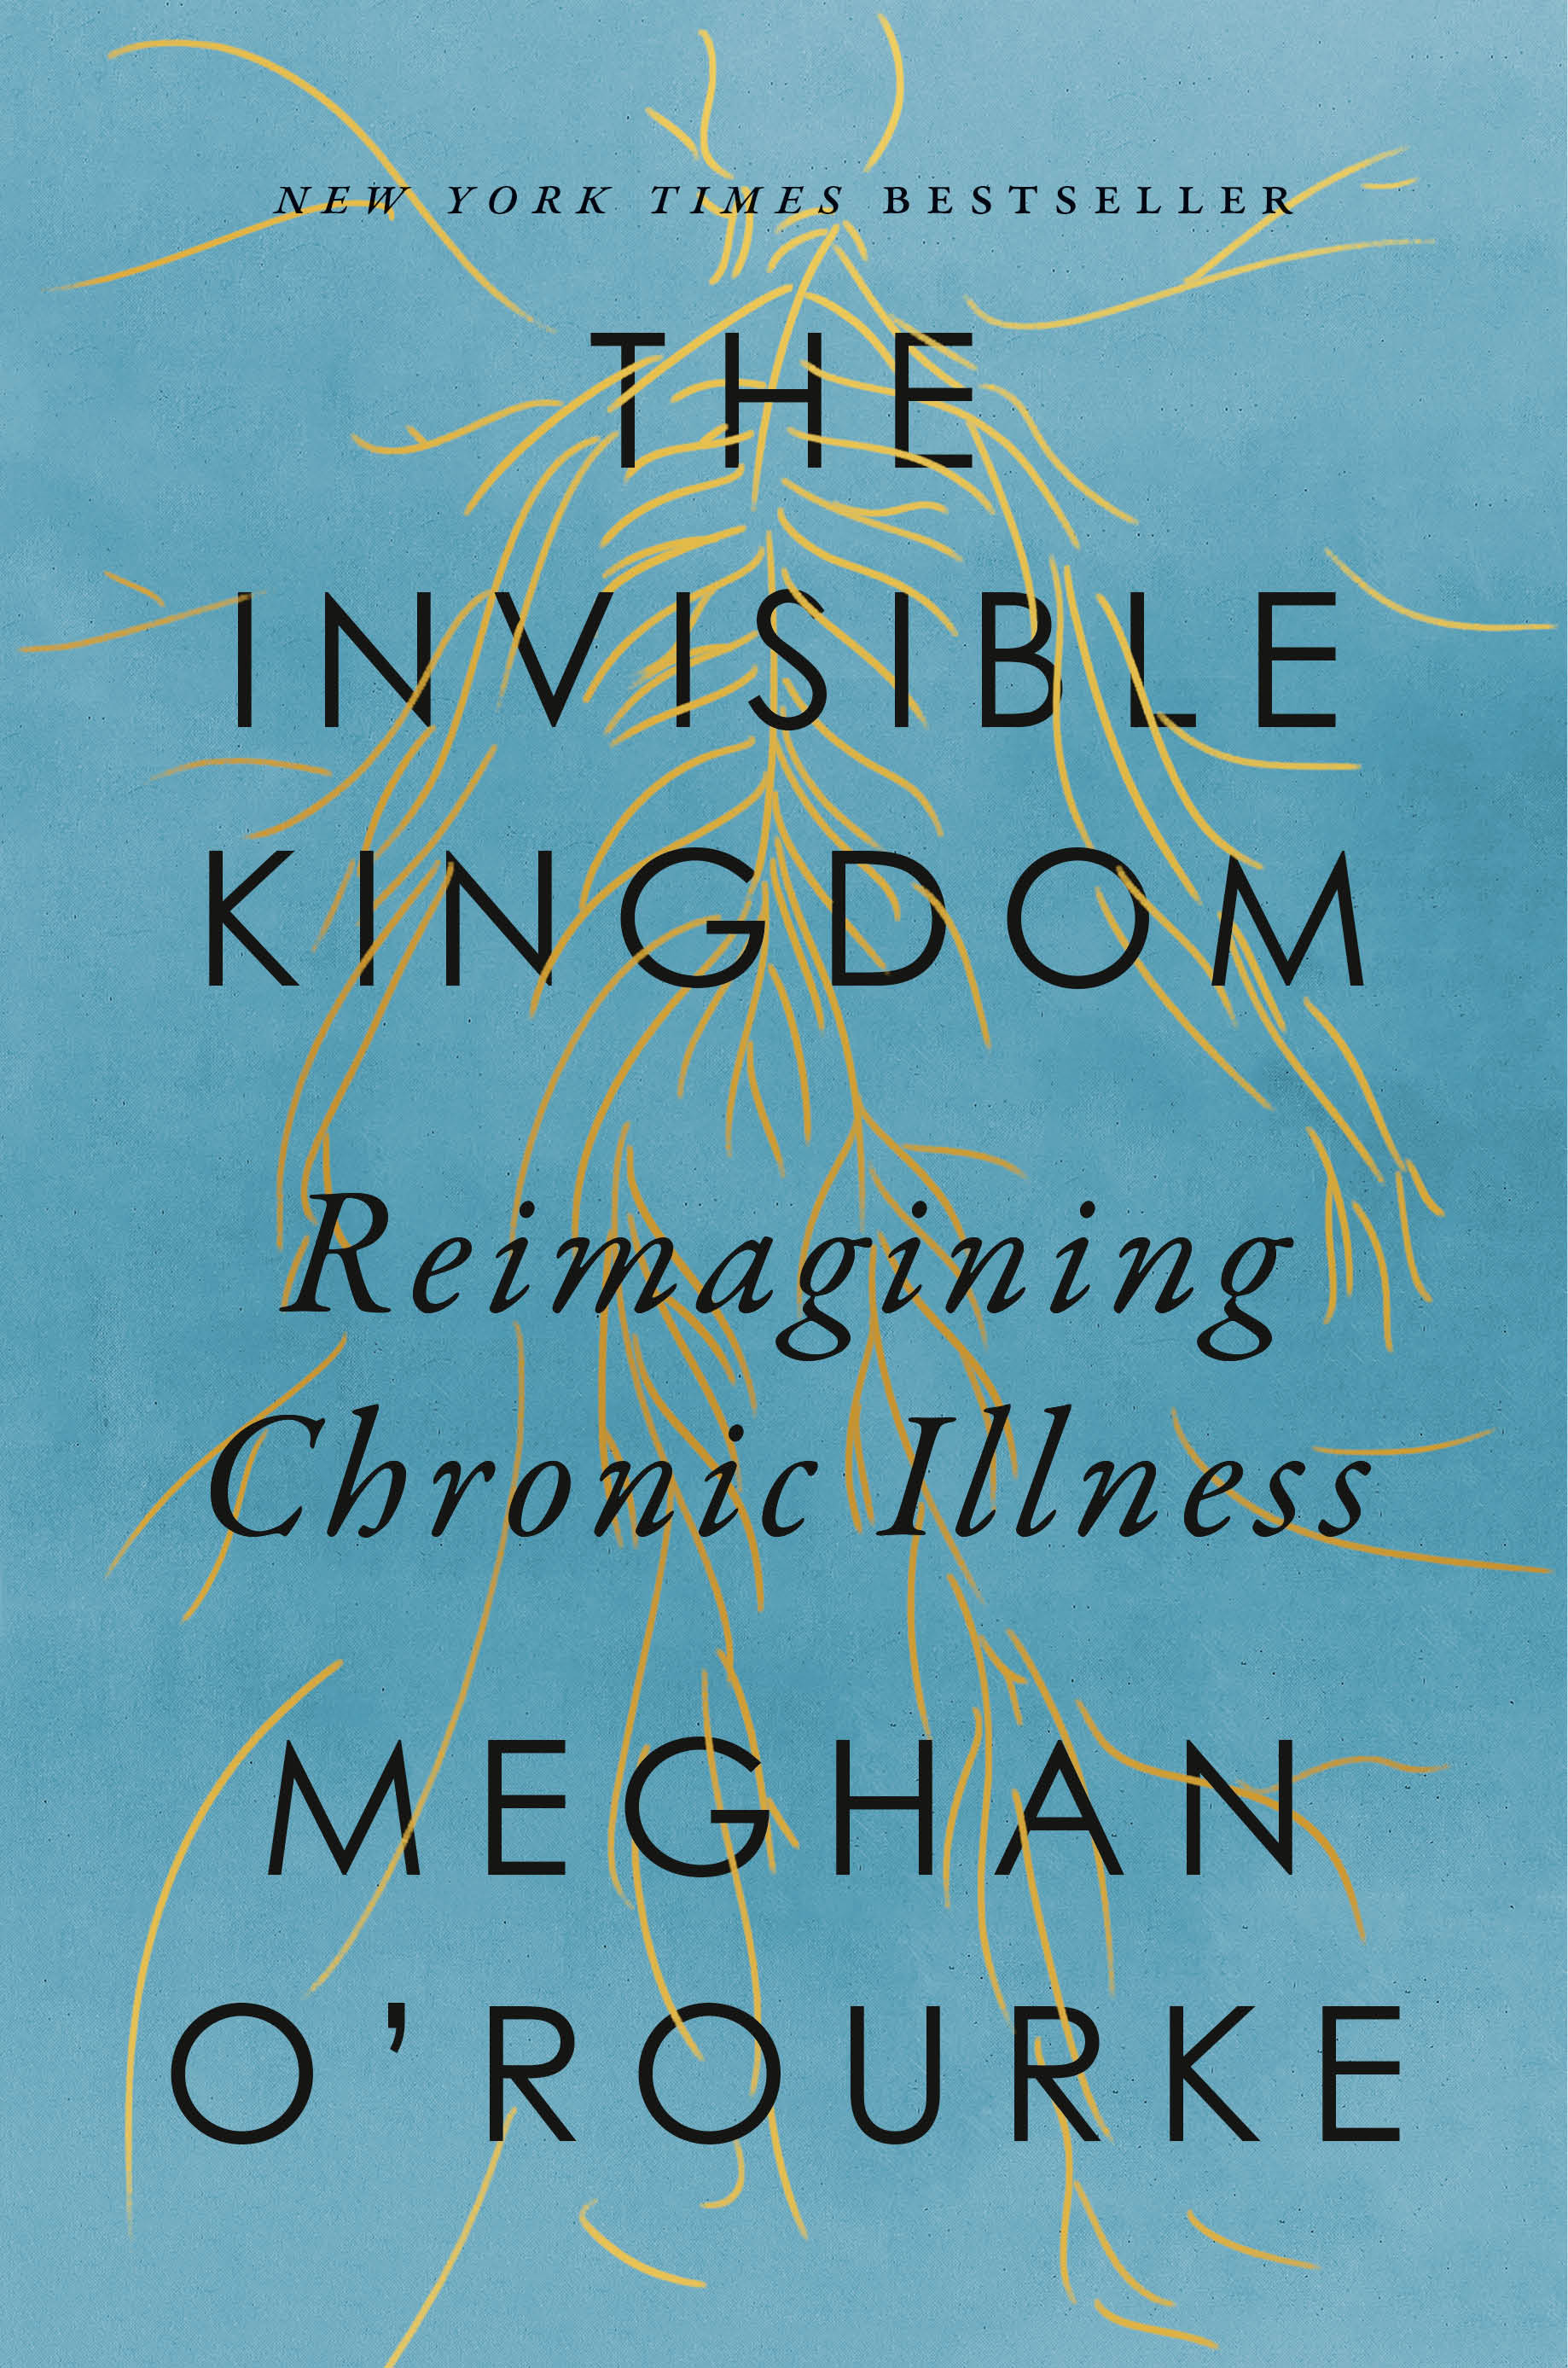 The Invisible Kingdom : Reimagining Chronic Illness | O'Rourke, Meghan